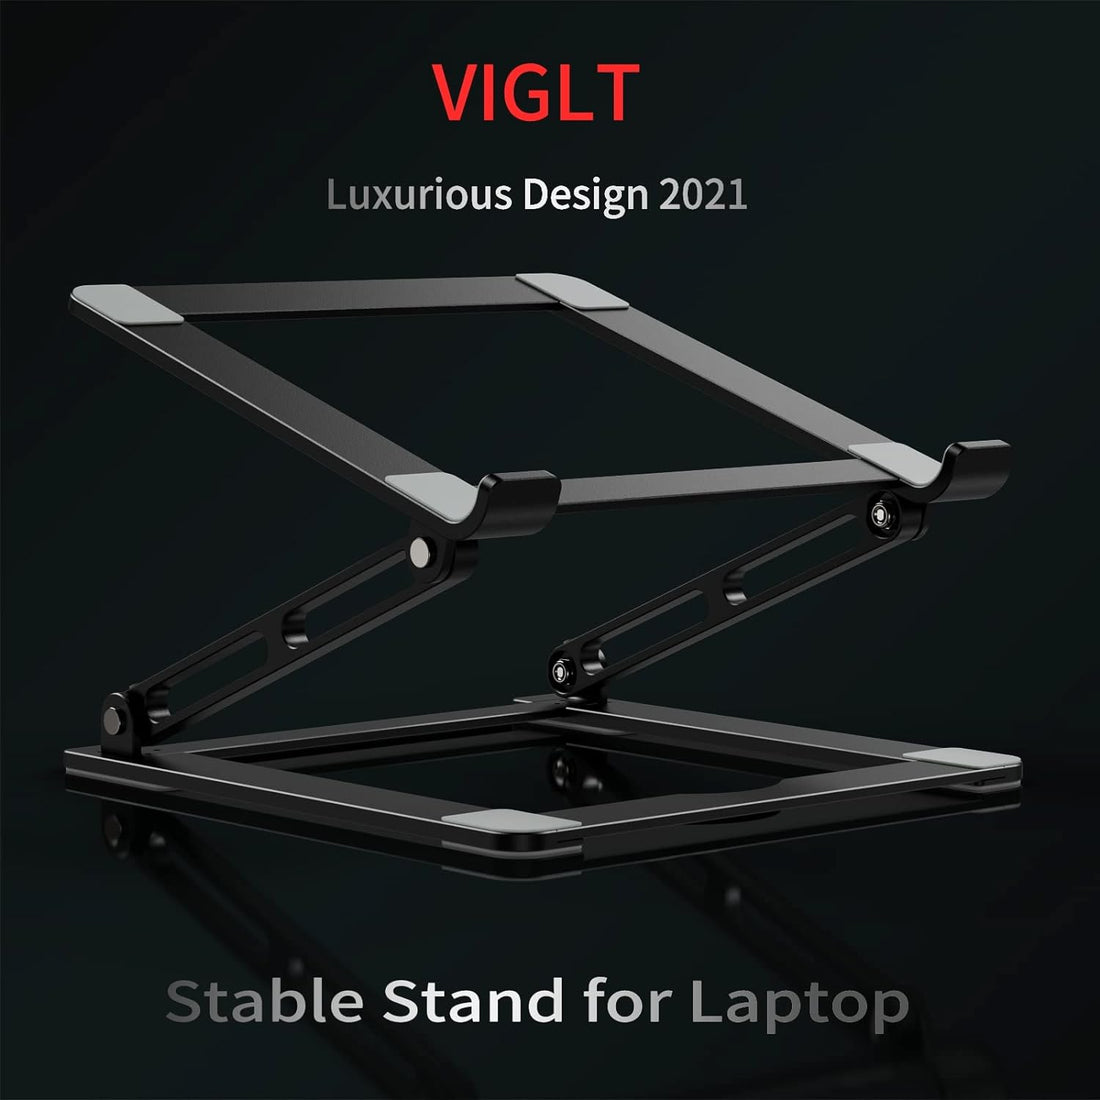 Laptop Stand for Desk, Adjustable Laptop Stand Holder Portable Laptop Riser with Multi-Angle Height Adjustable Computer Stand for MacBook Air/Pro and More Notebooks 10-17.3"-Black